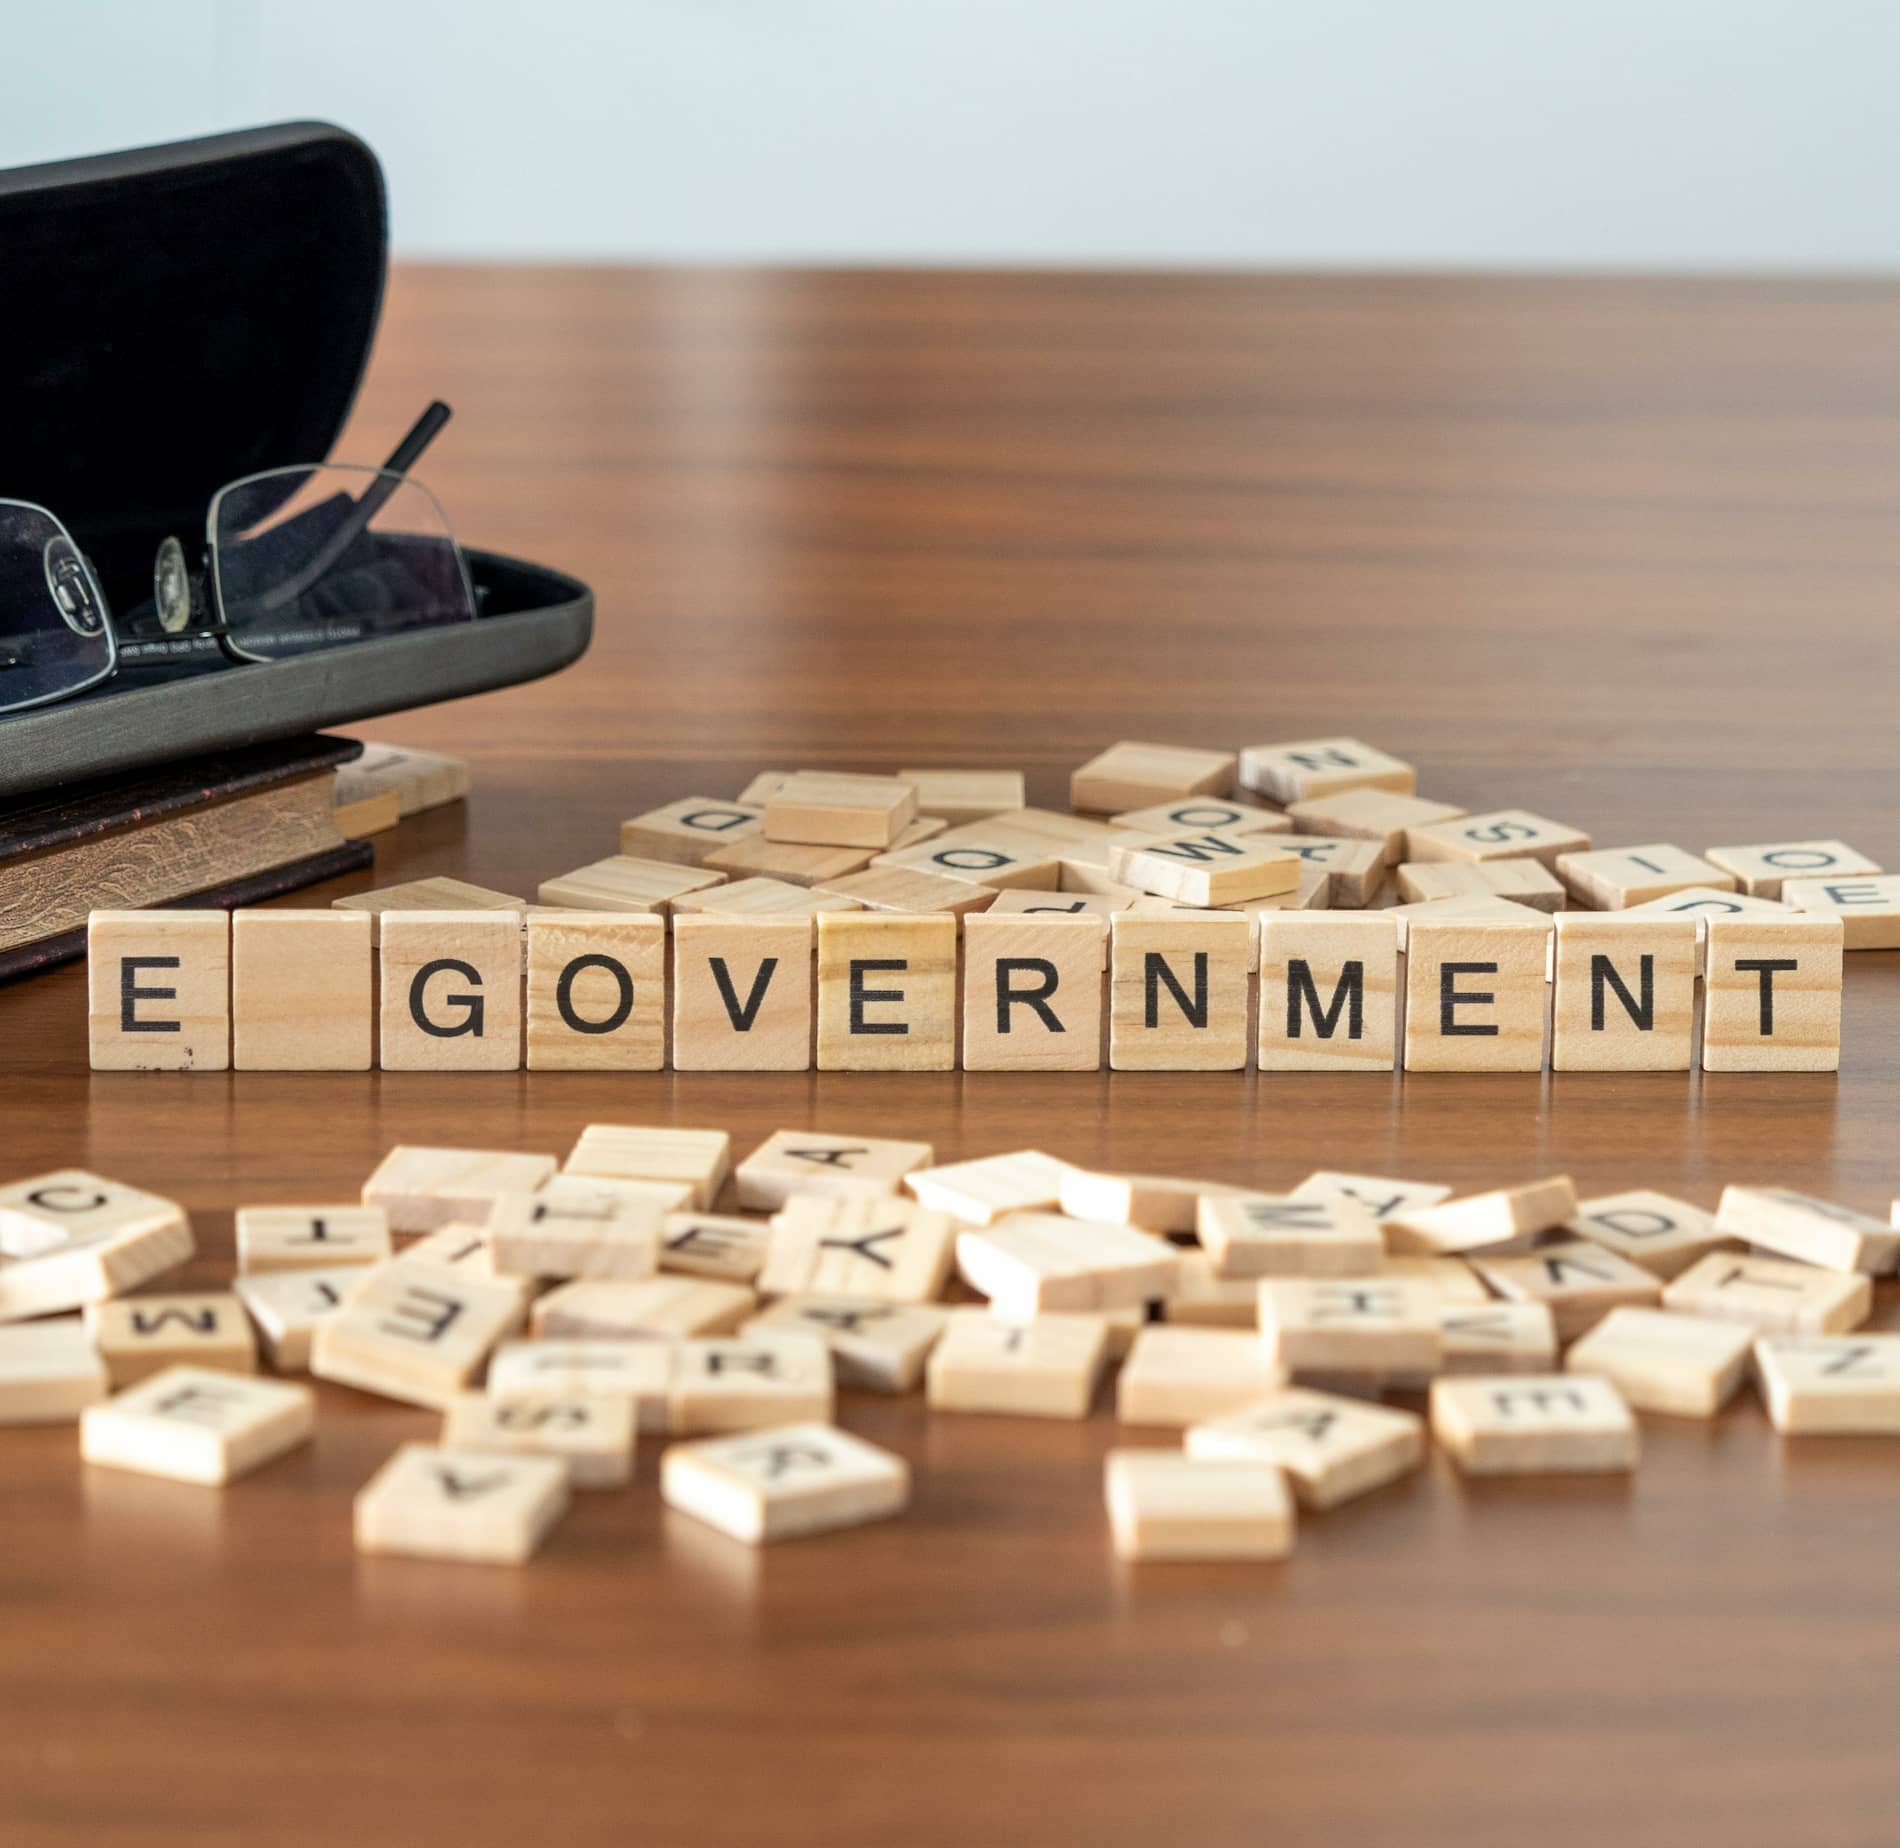 the word e-government on wooden blocks